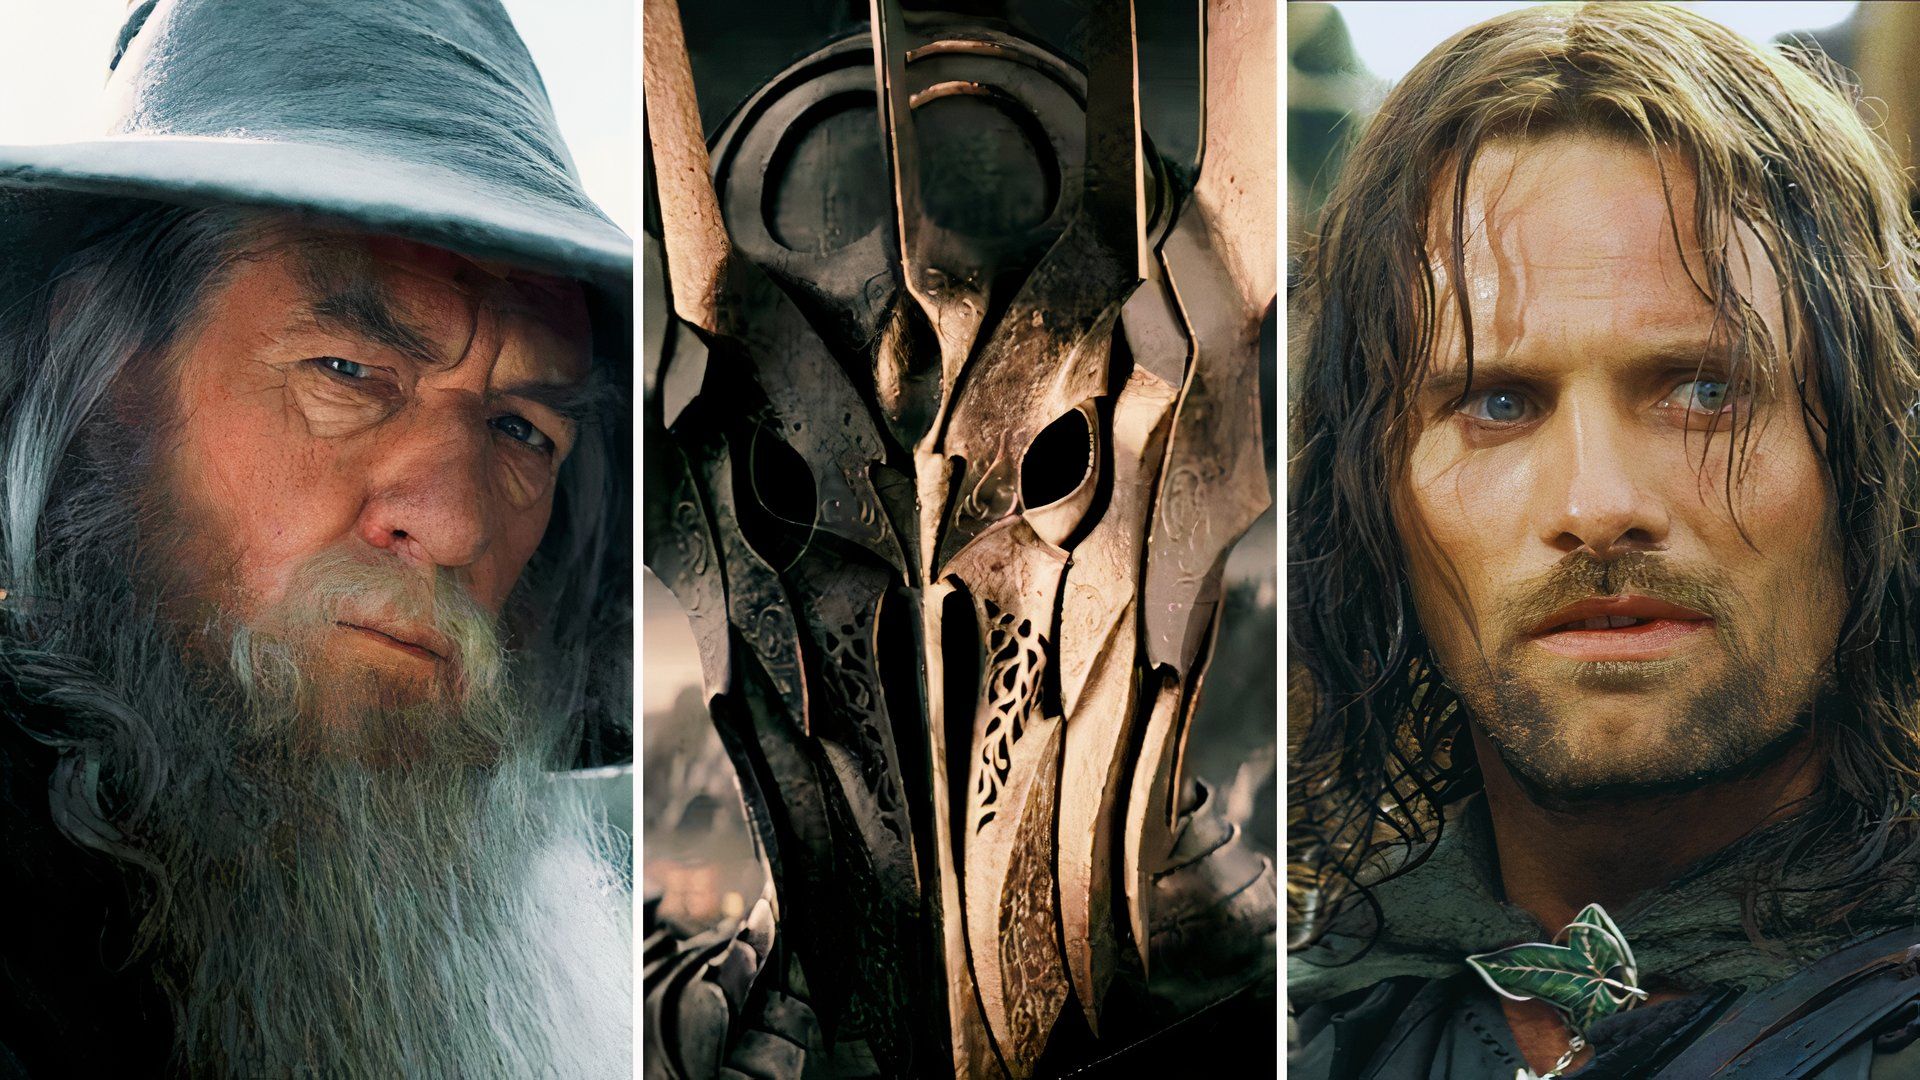 Gandalf, Sauron, and Aragorn in Lord of the Rings